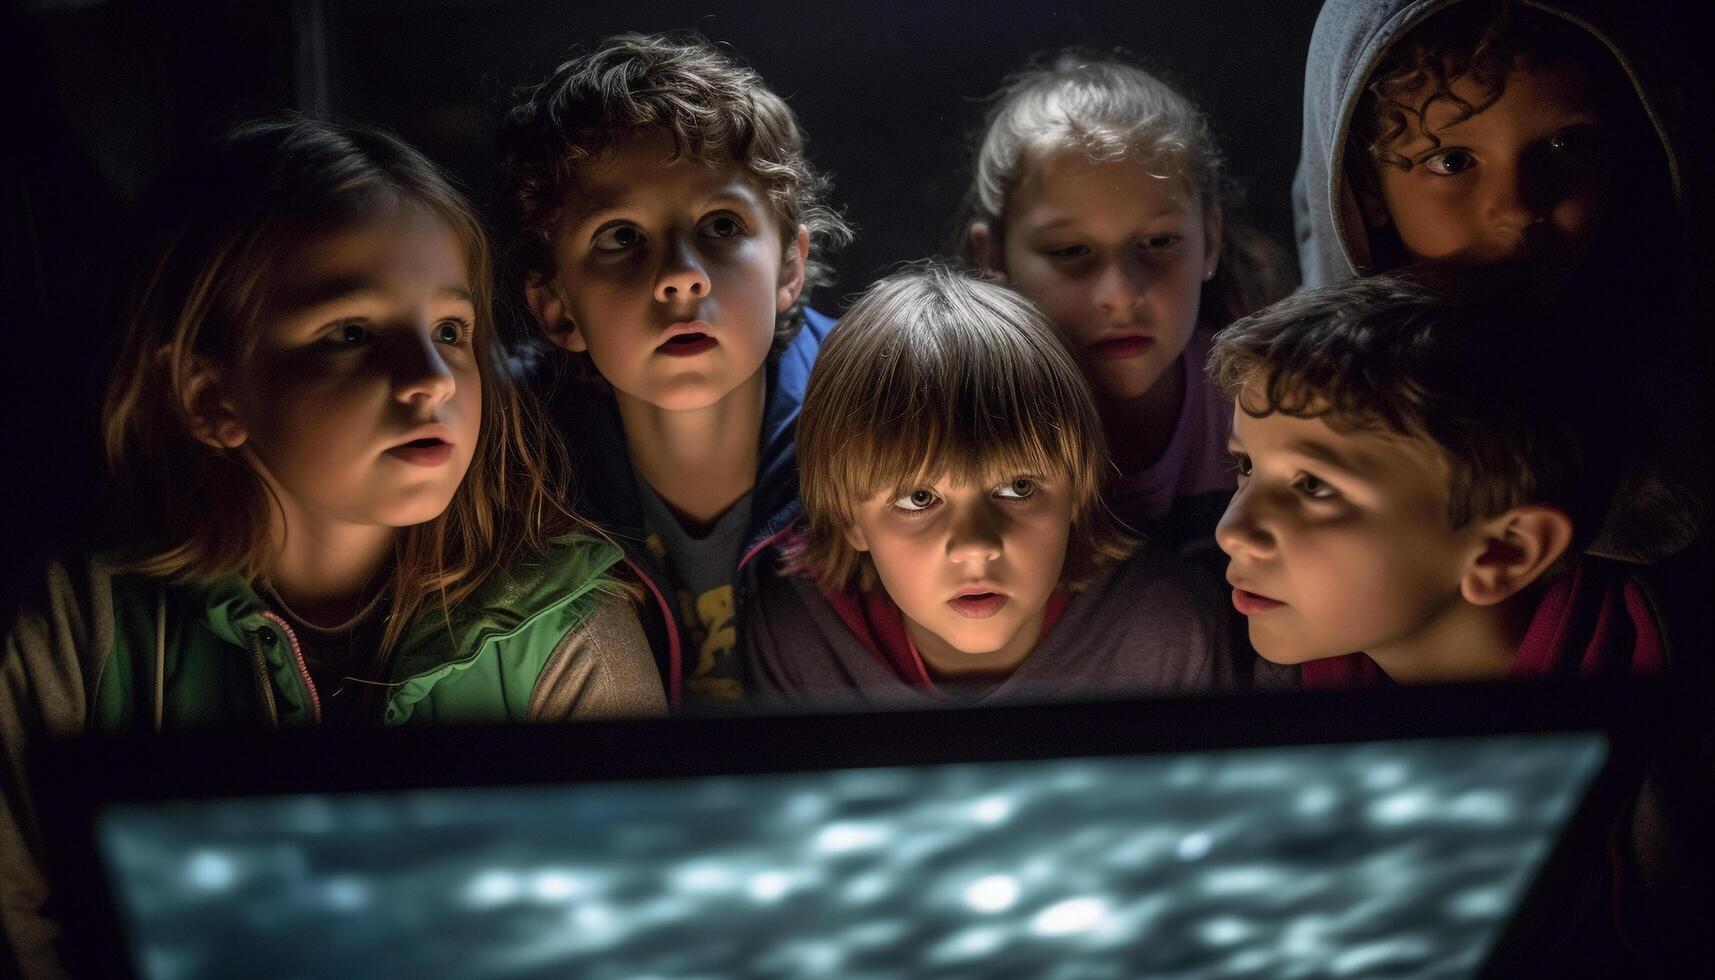 Group of children watching movie on computer monitor indoors at night generated by AI photo